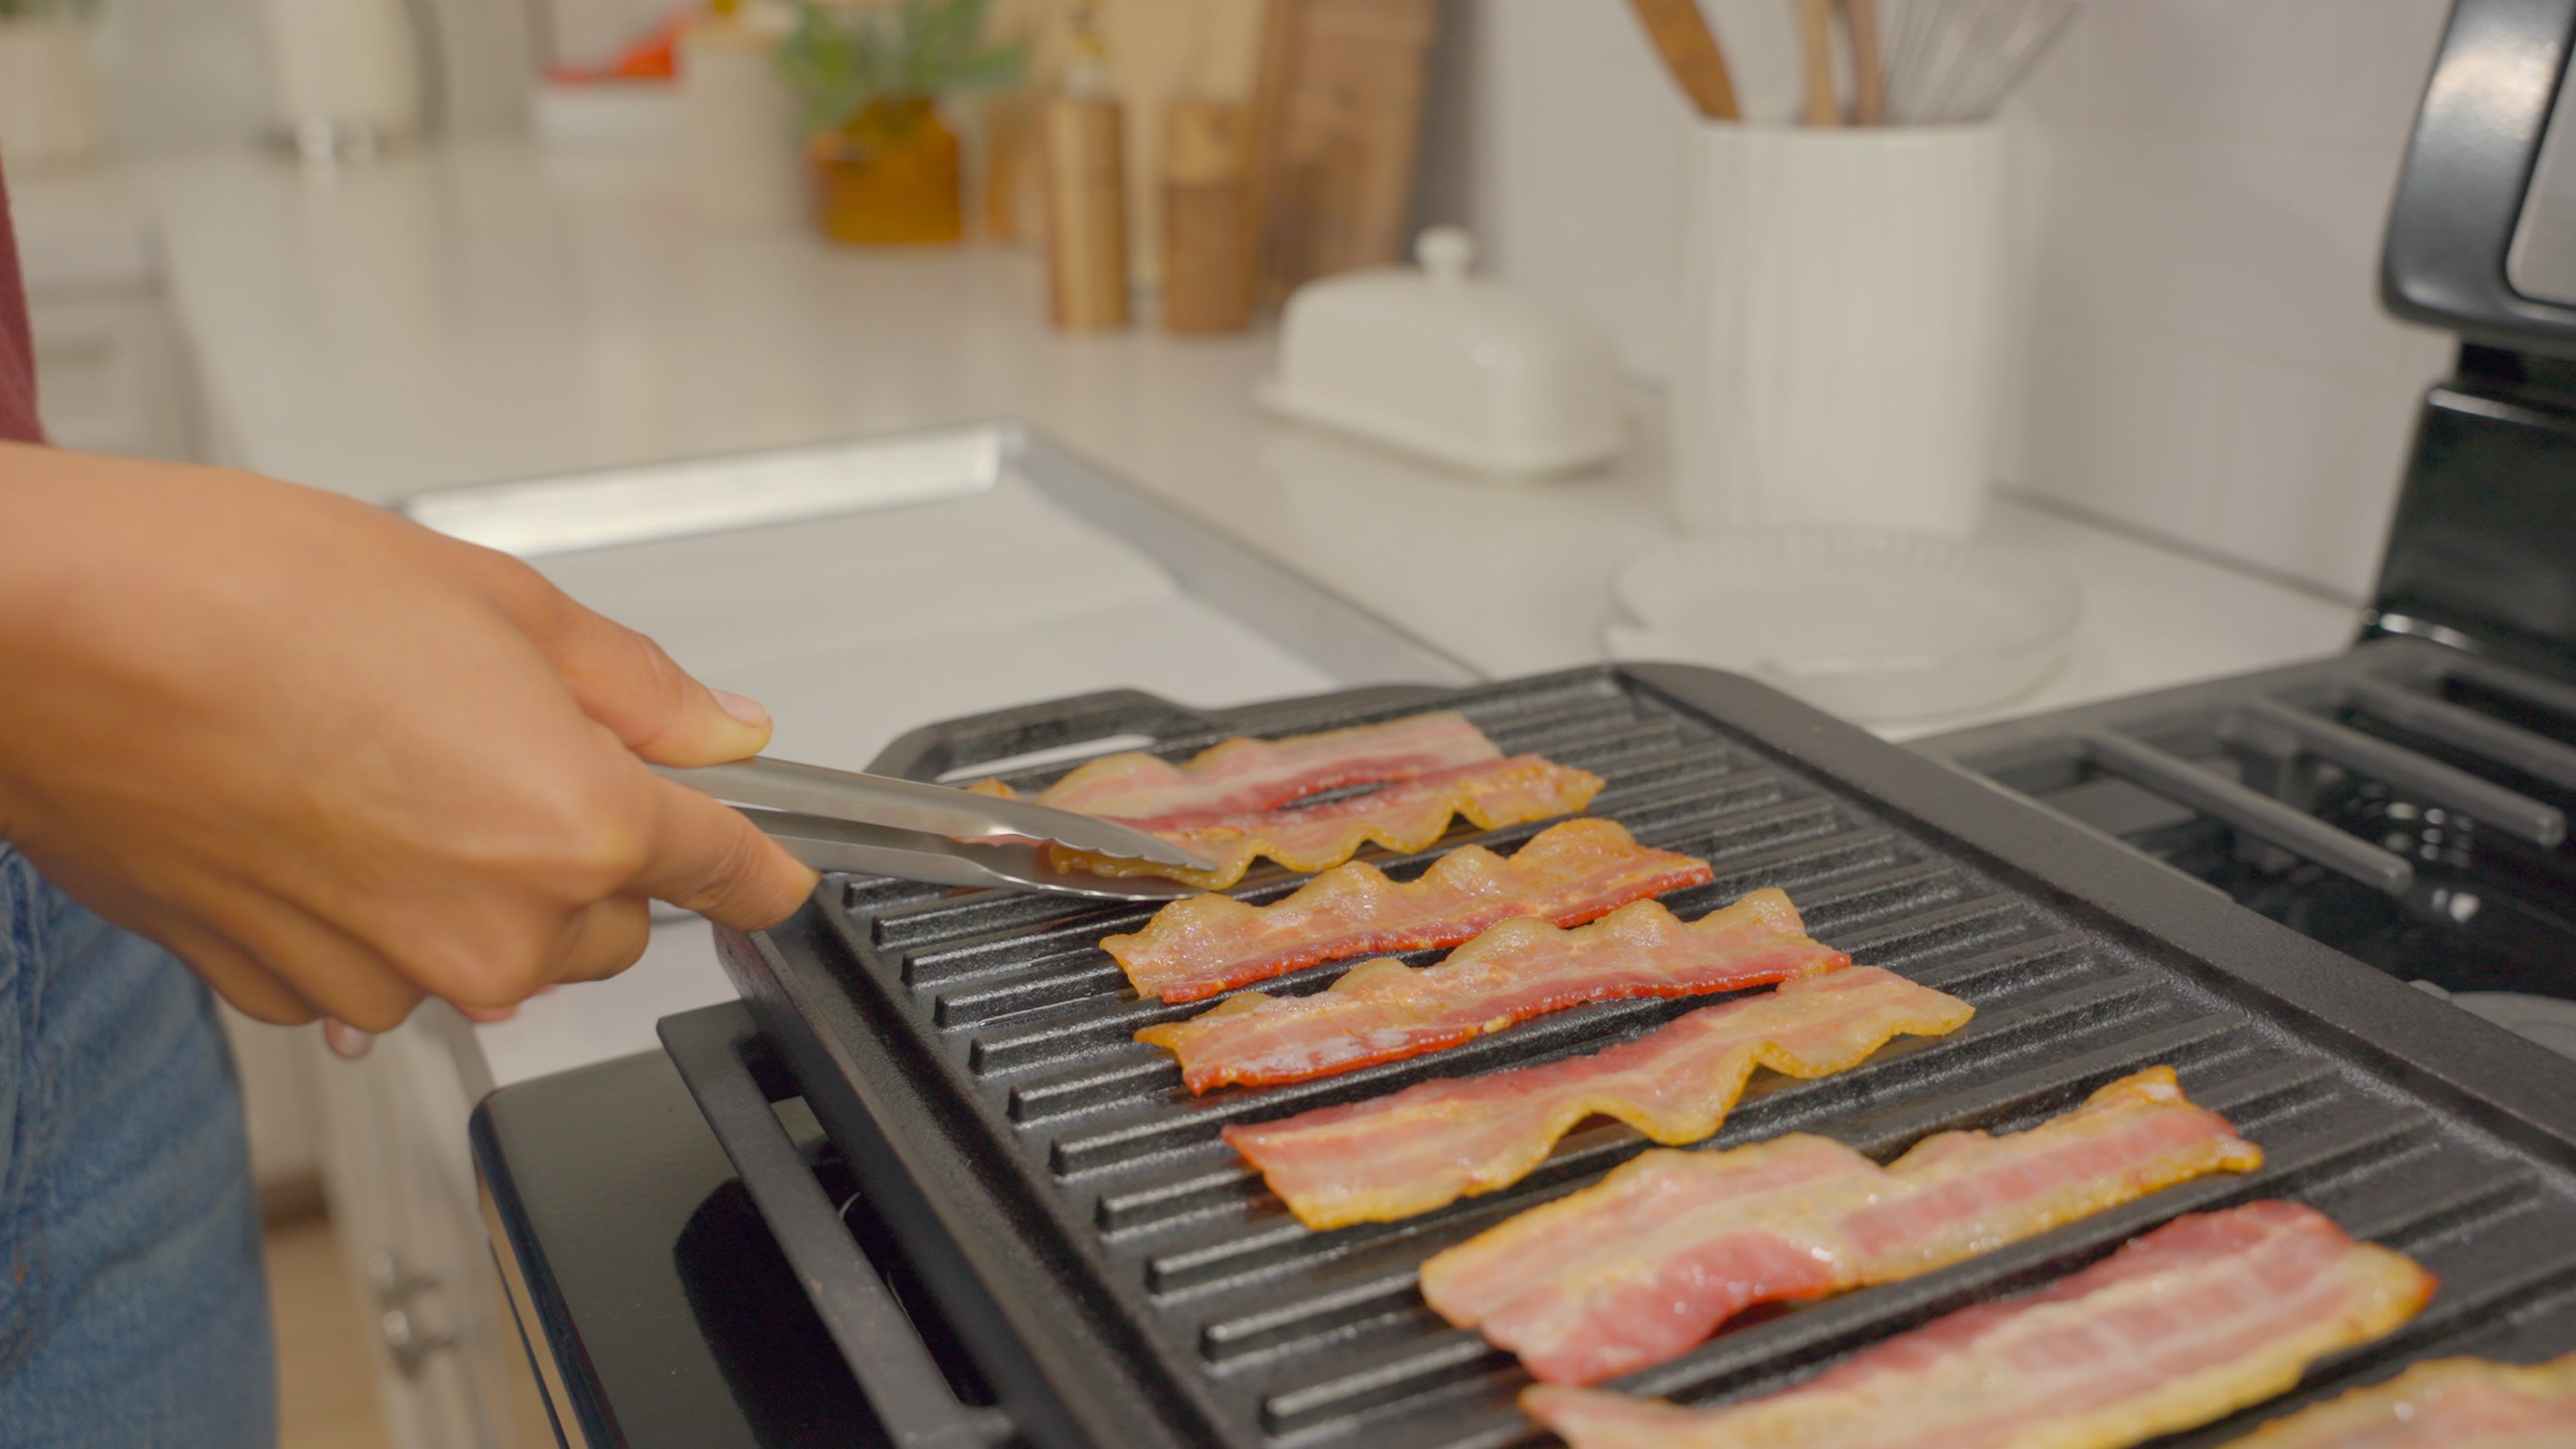 Prepare bacon by slicing each piece in half, then laying them on a pan.